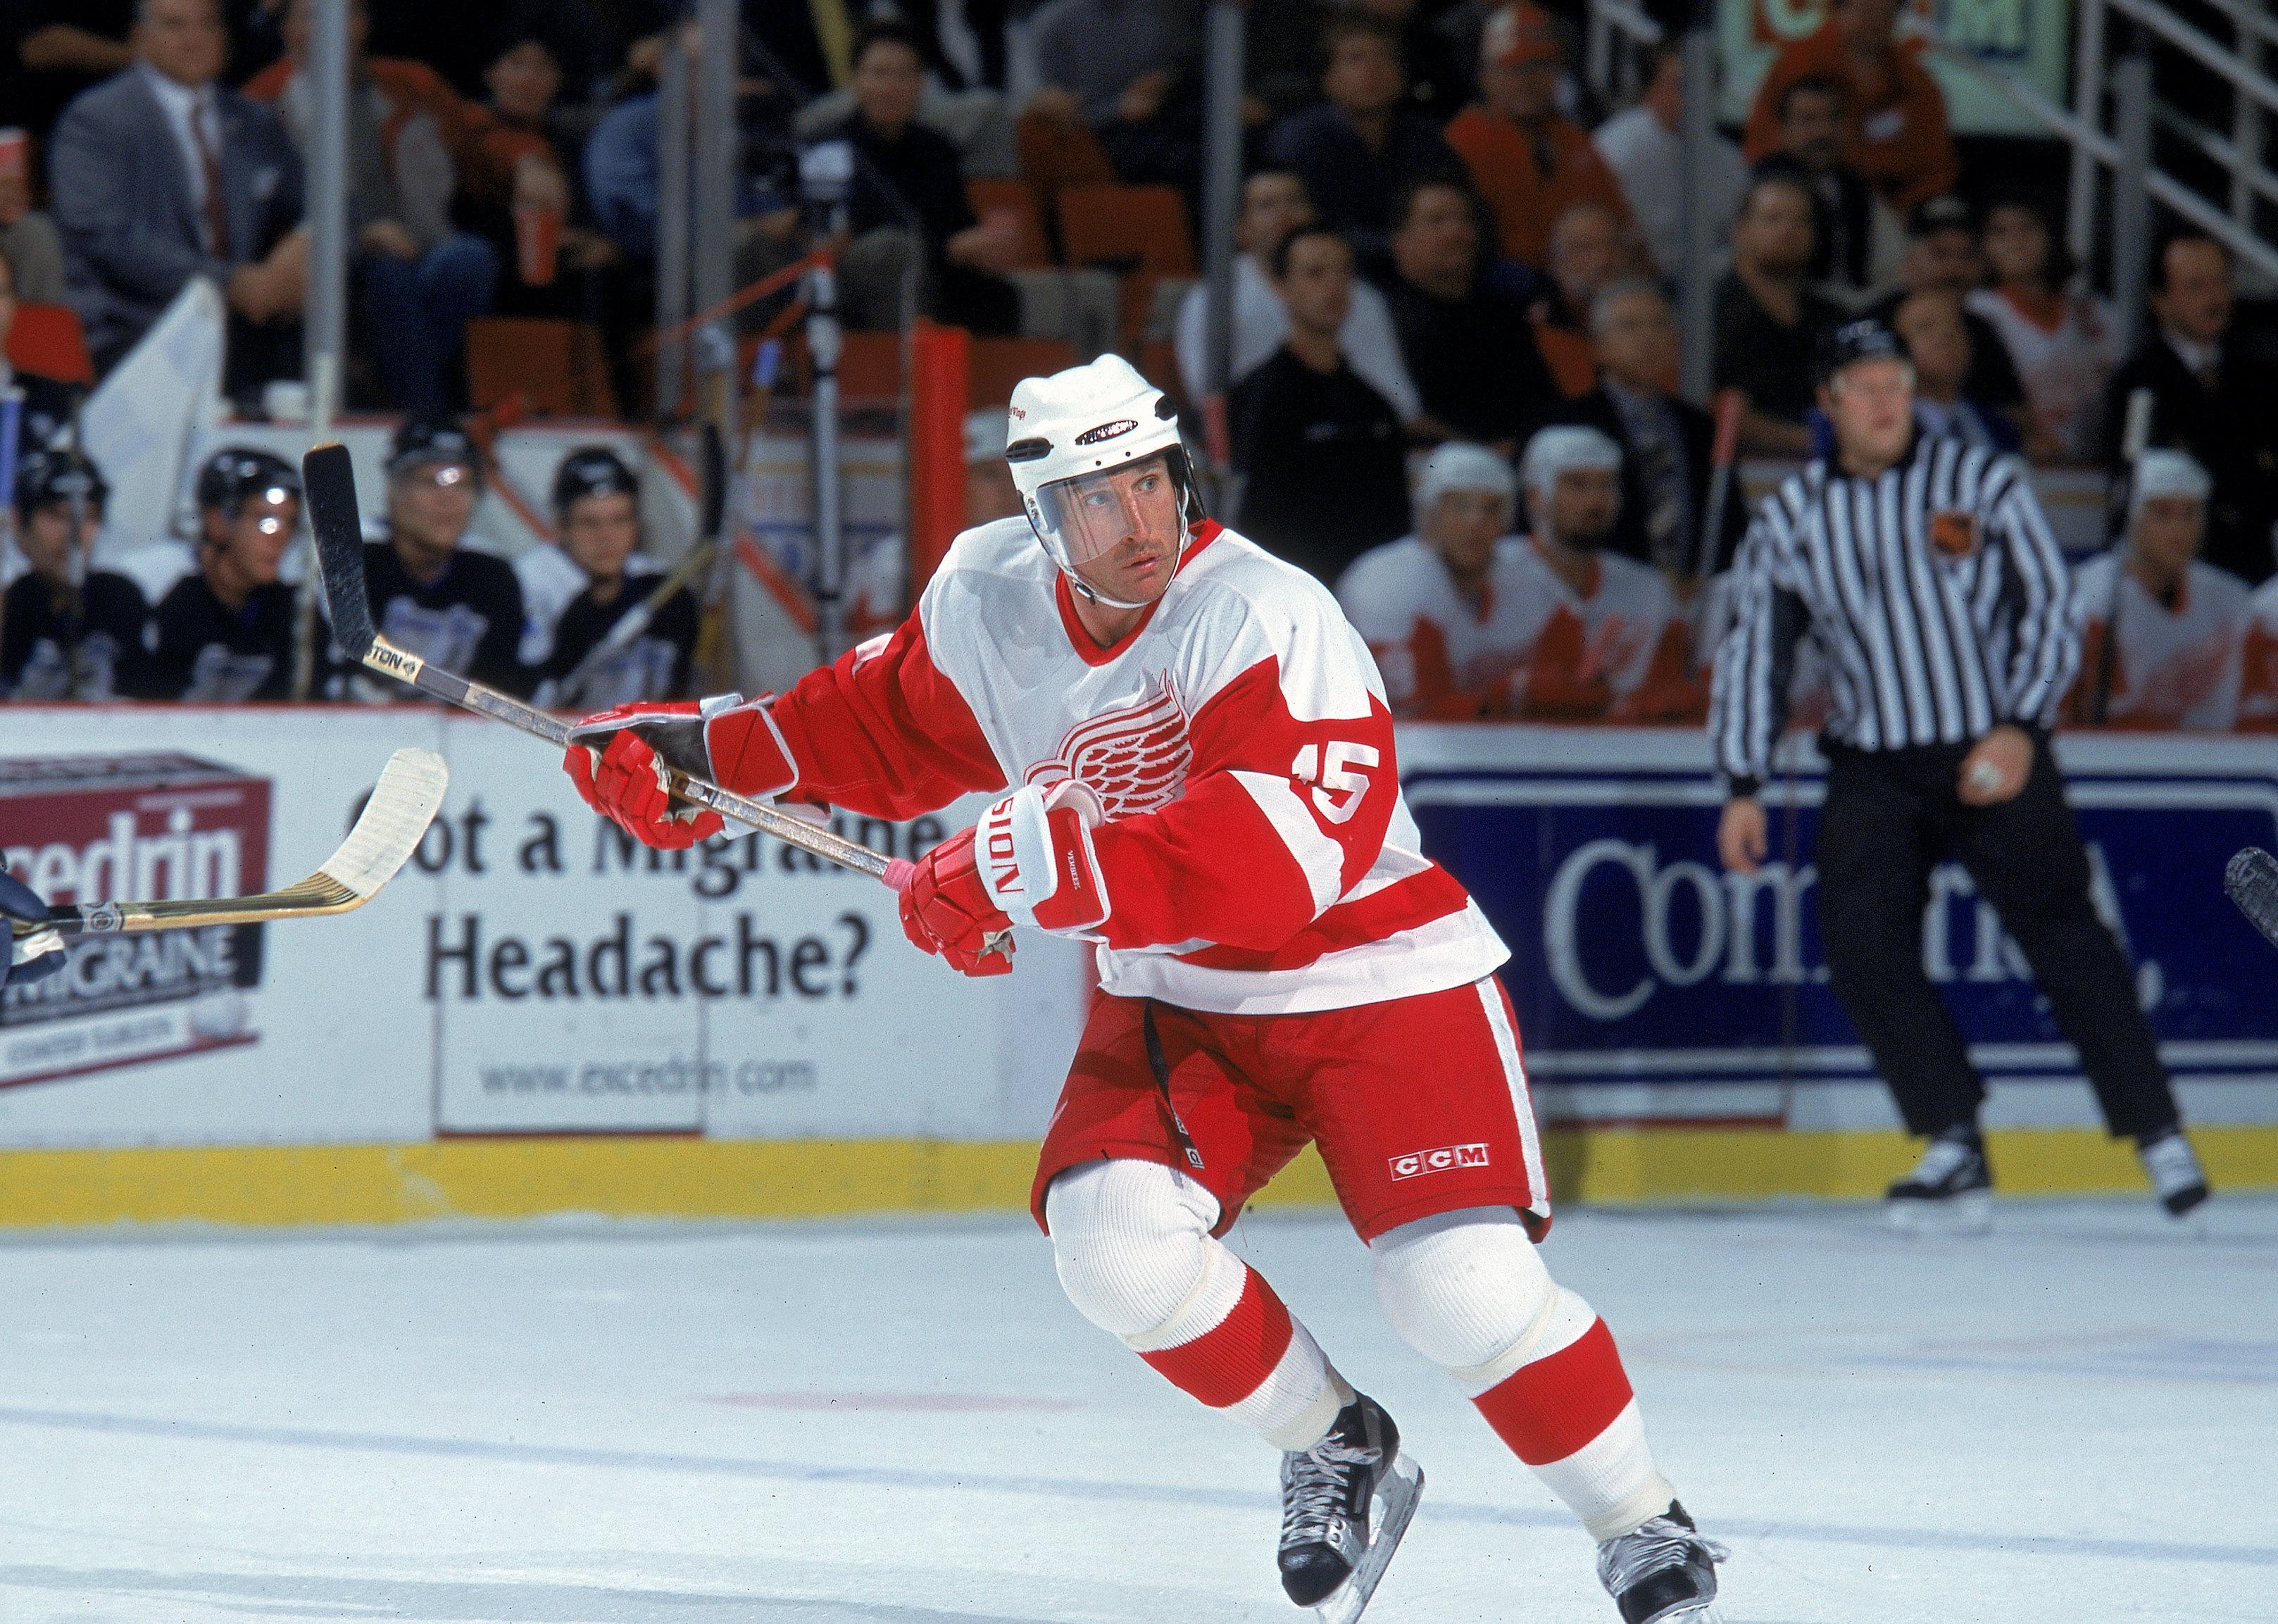 Pat Verbeek of the Detroit Red Wings skates down the ice during a game.